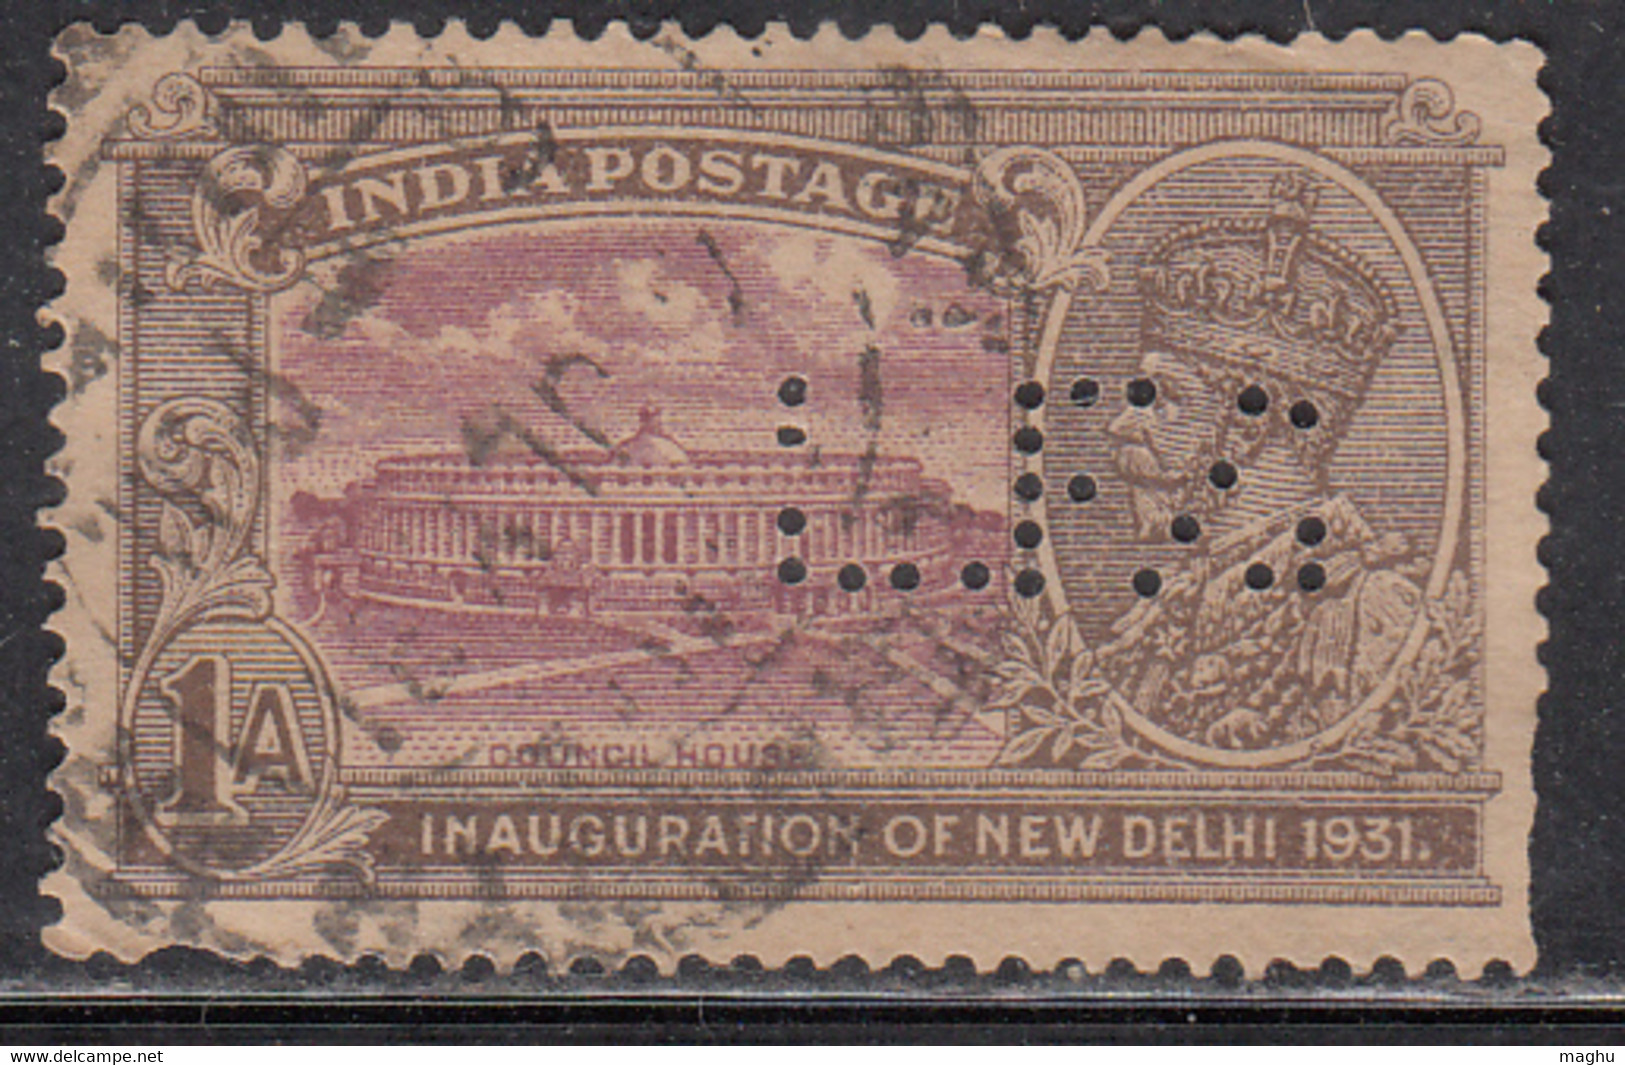 Perfin / Perfins  On 1a British India Used 1931 Inauguration - Perforés